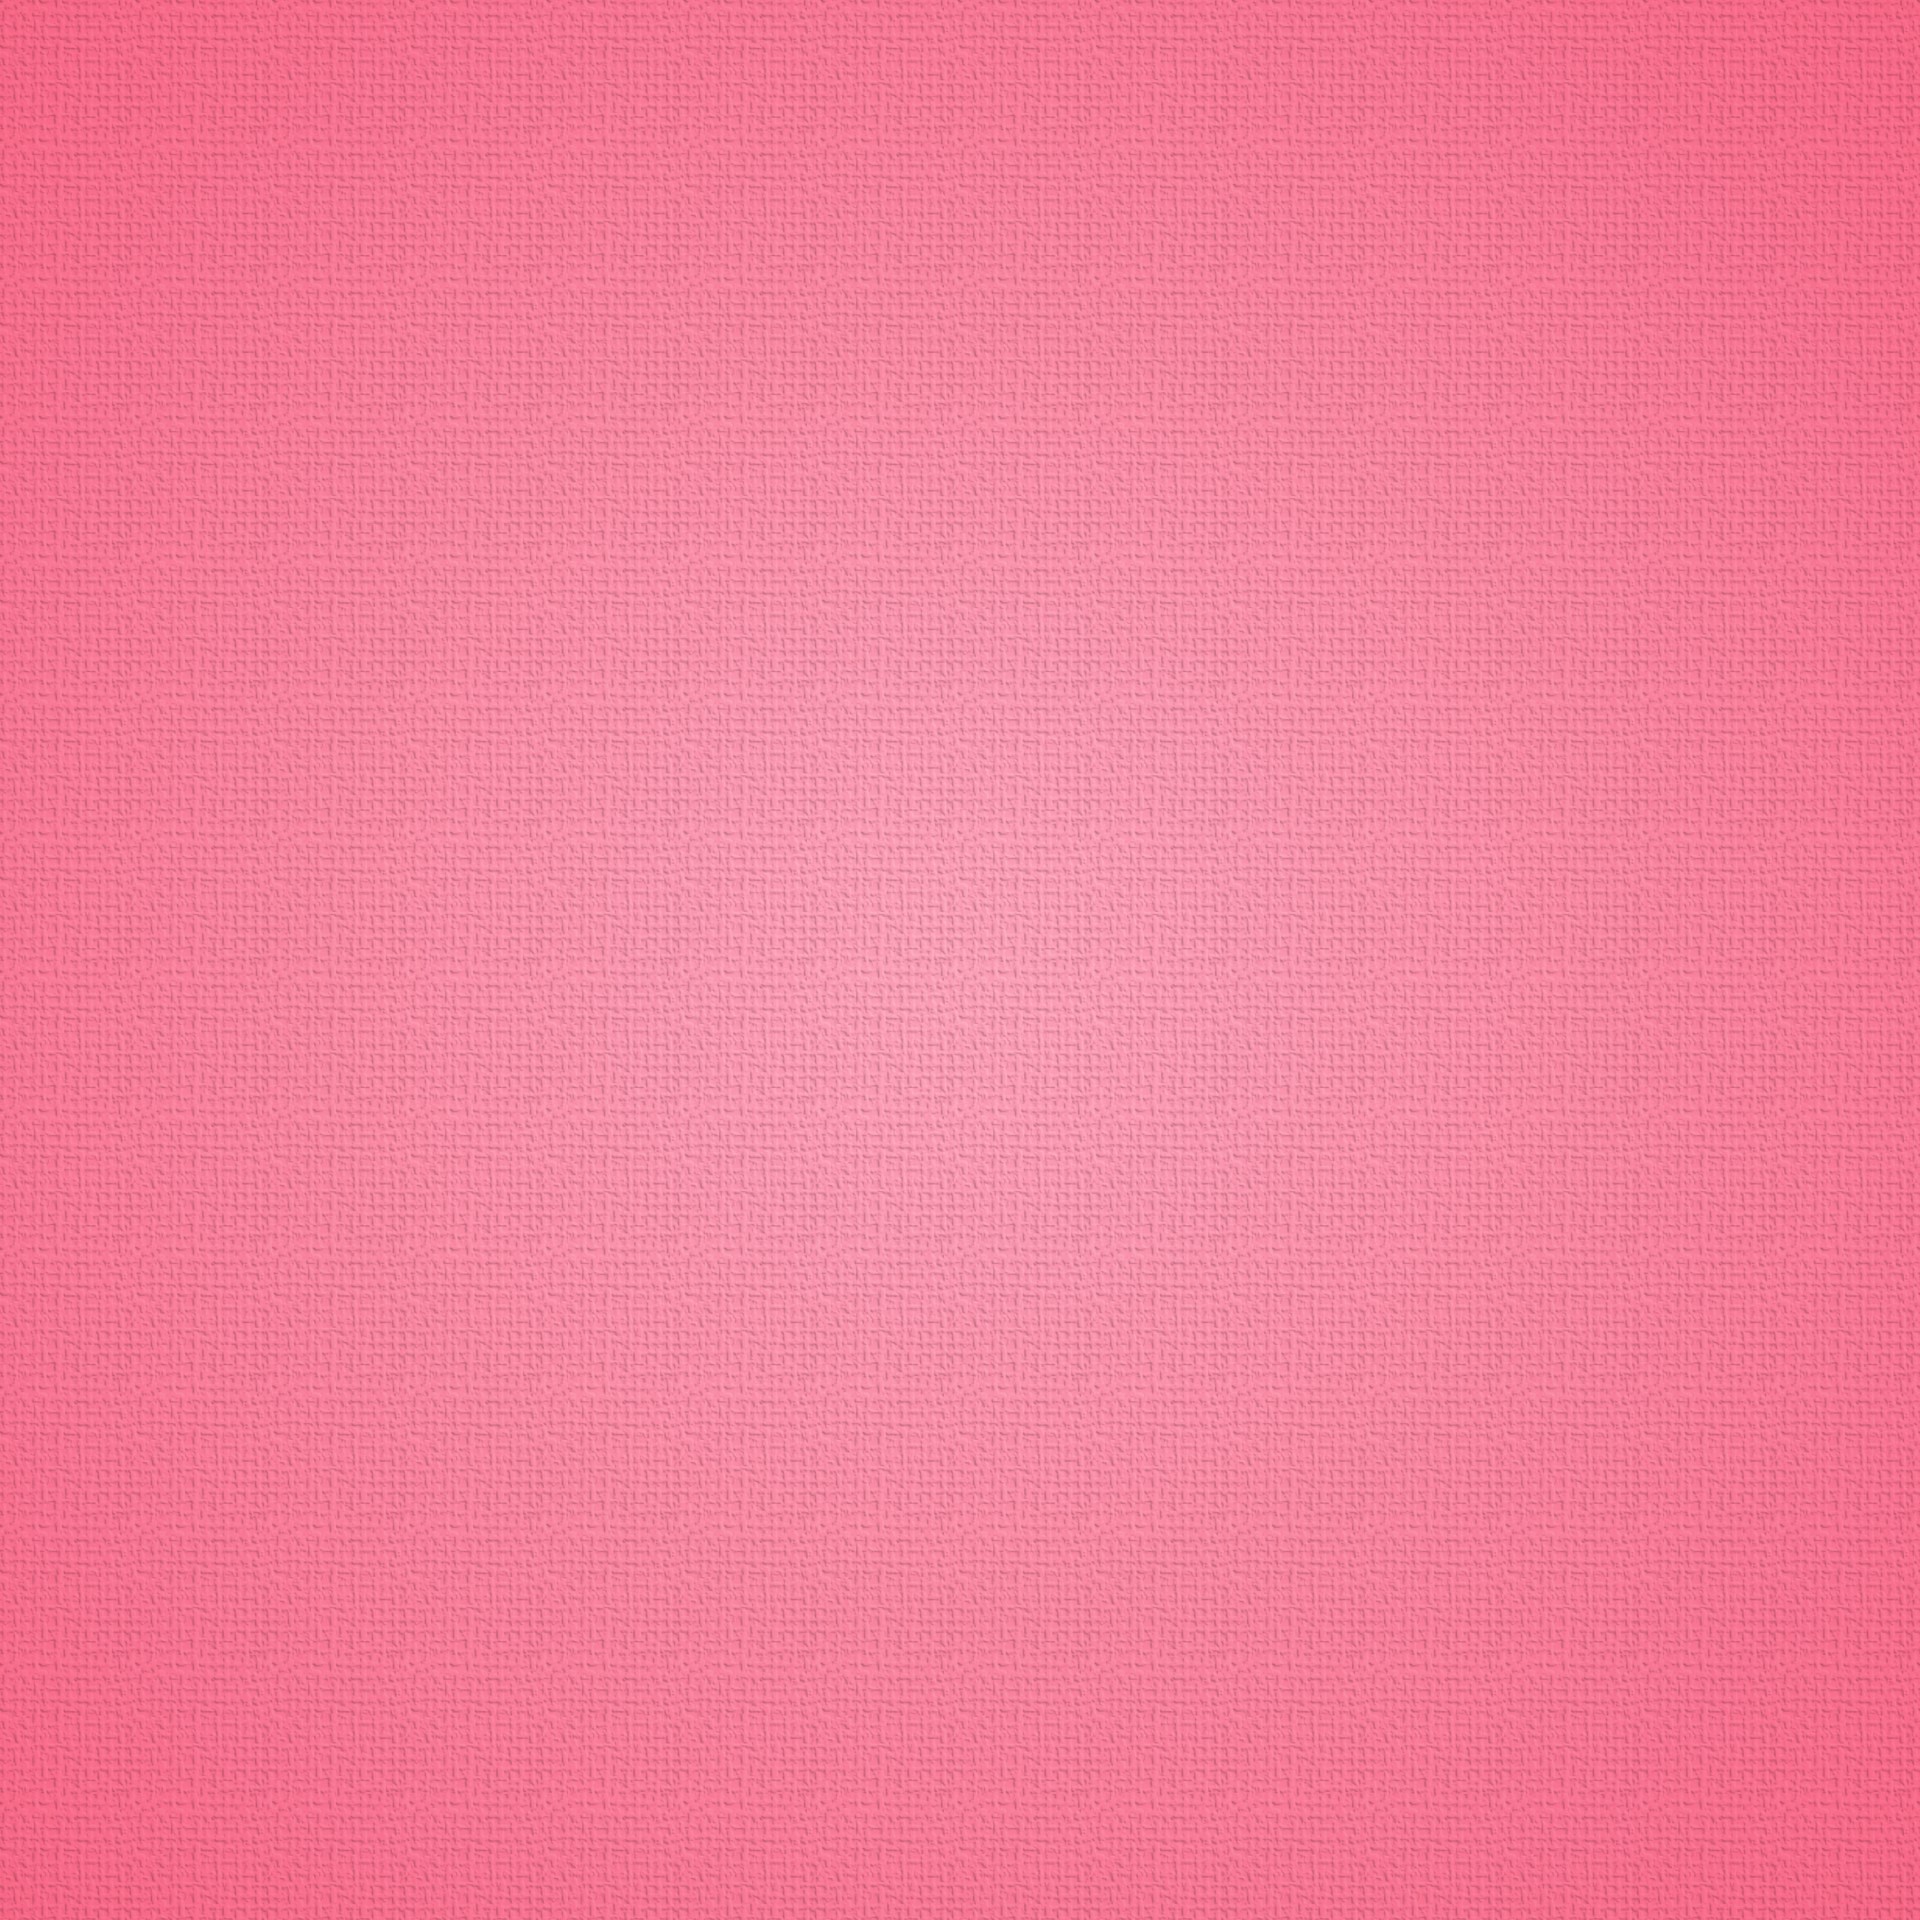 Download free photo of Pink,pink background,background,texture,textile -  from